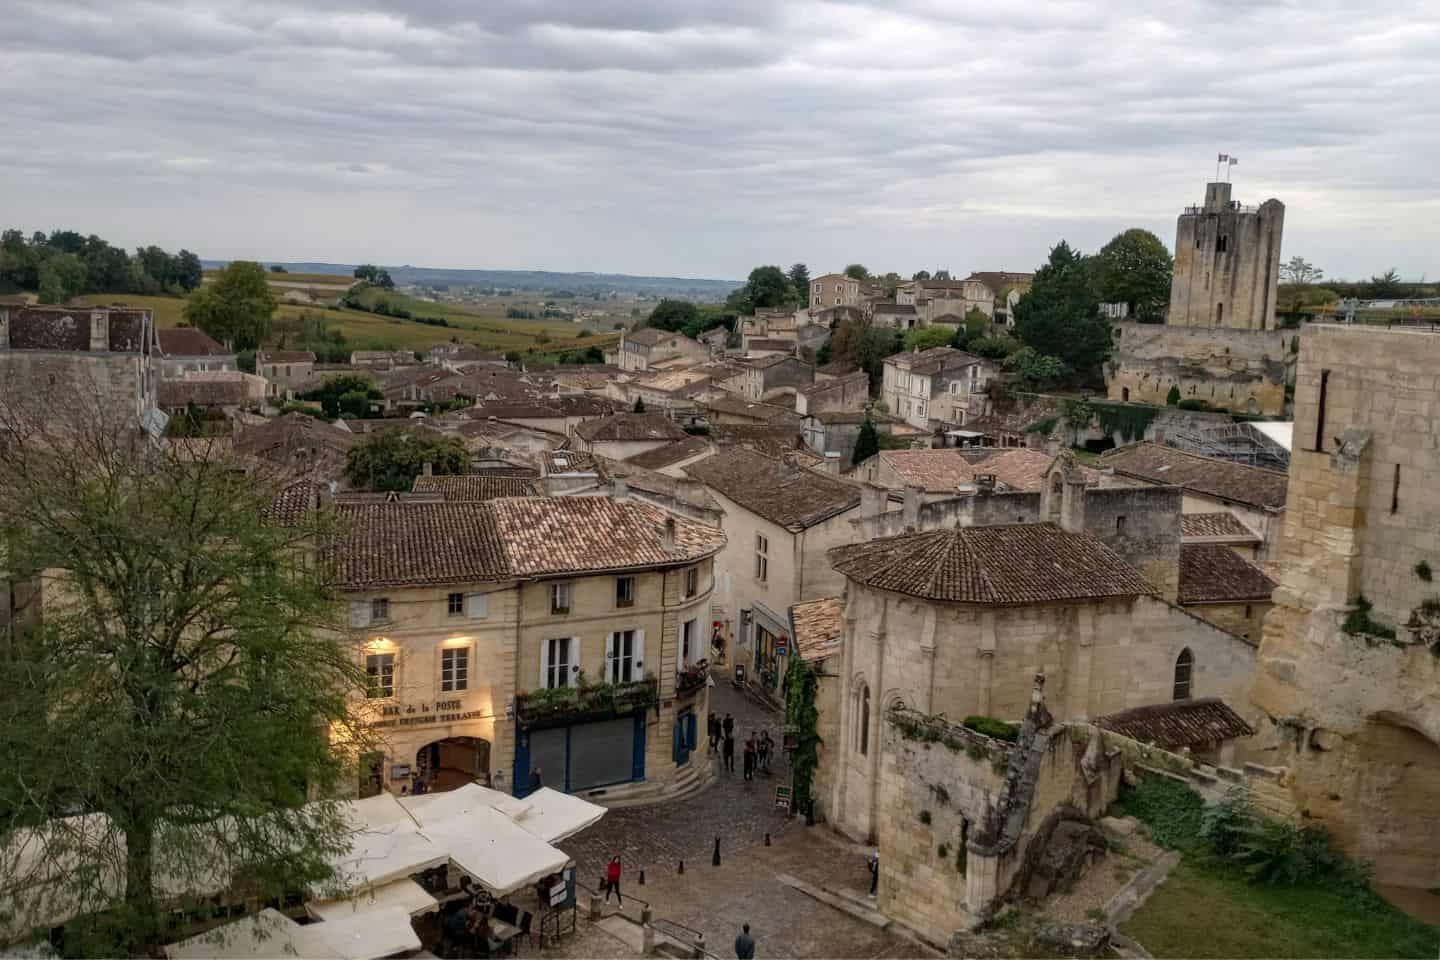 Rooftops of an old French town